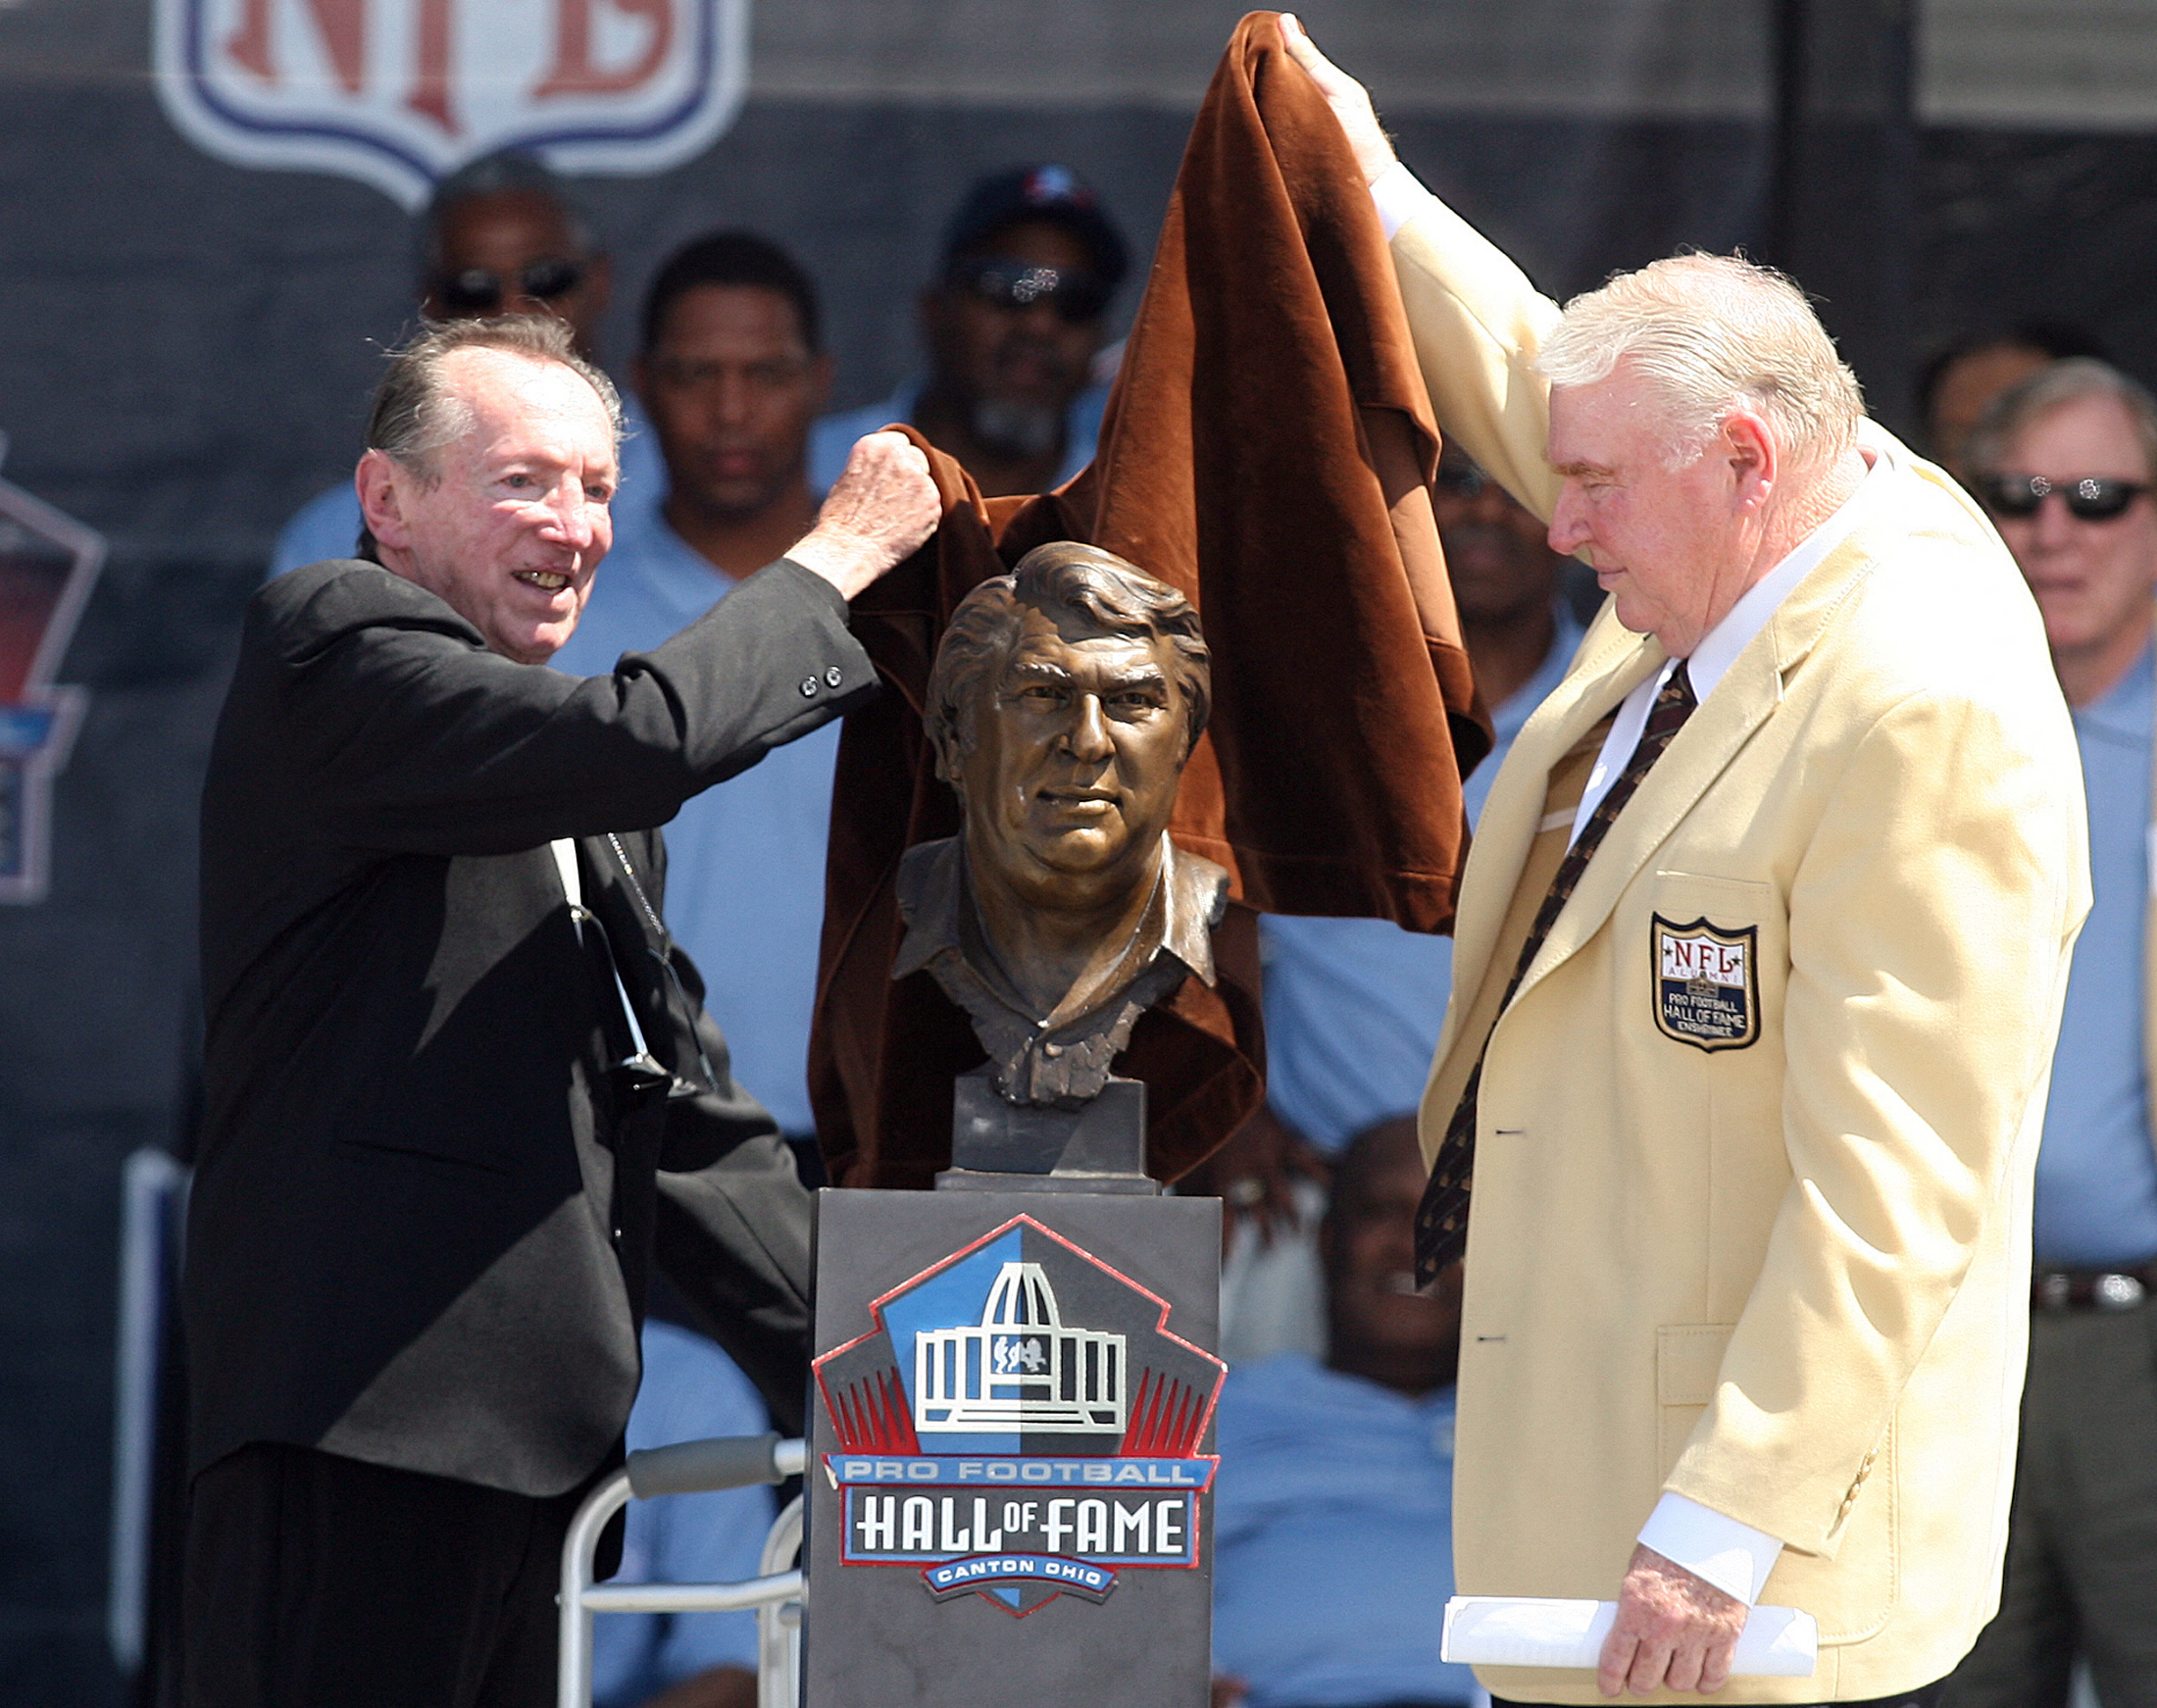 FILE PHOTO: Oakland Raiders team owner Al Davis (L) and former Raiders head coach John Madden unveil the bust of Madden upon his induction into the Pro Football Hall of Fame in Canton, Ohio August 5, 2006. Davis the was the presenter for Madden.